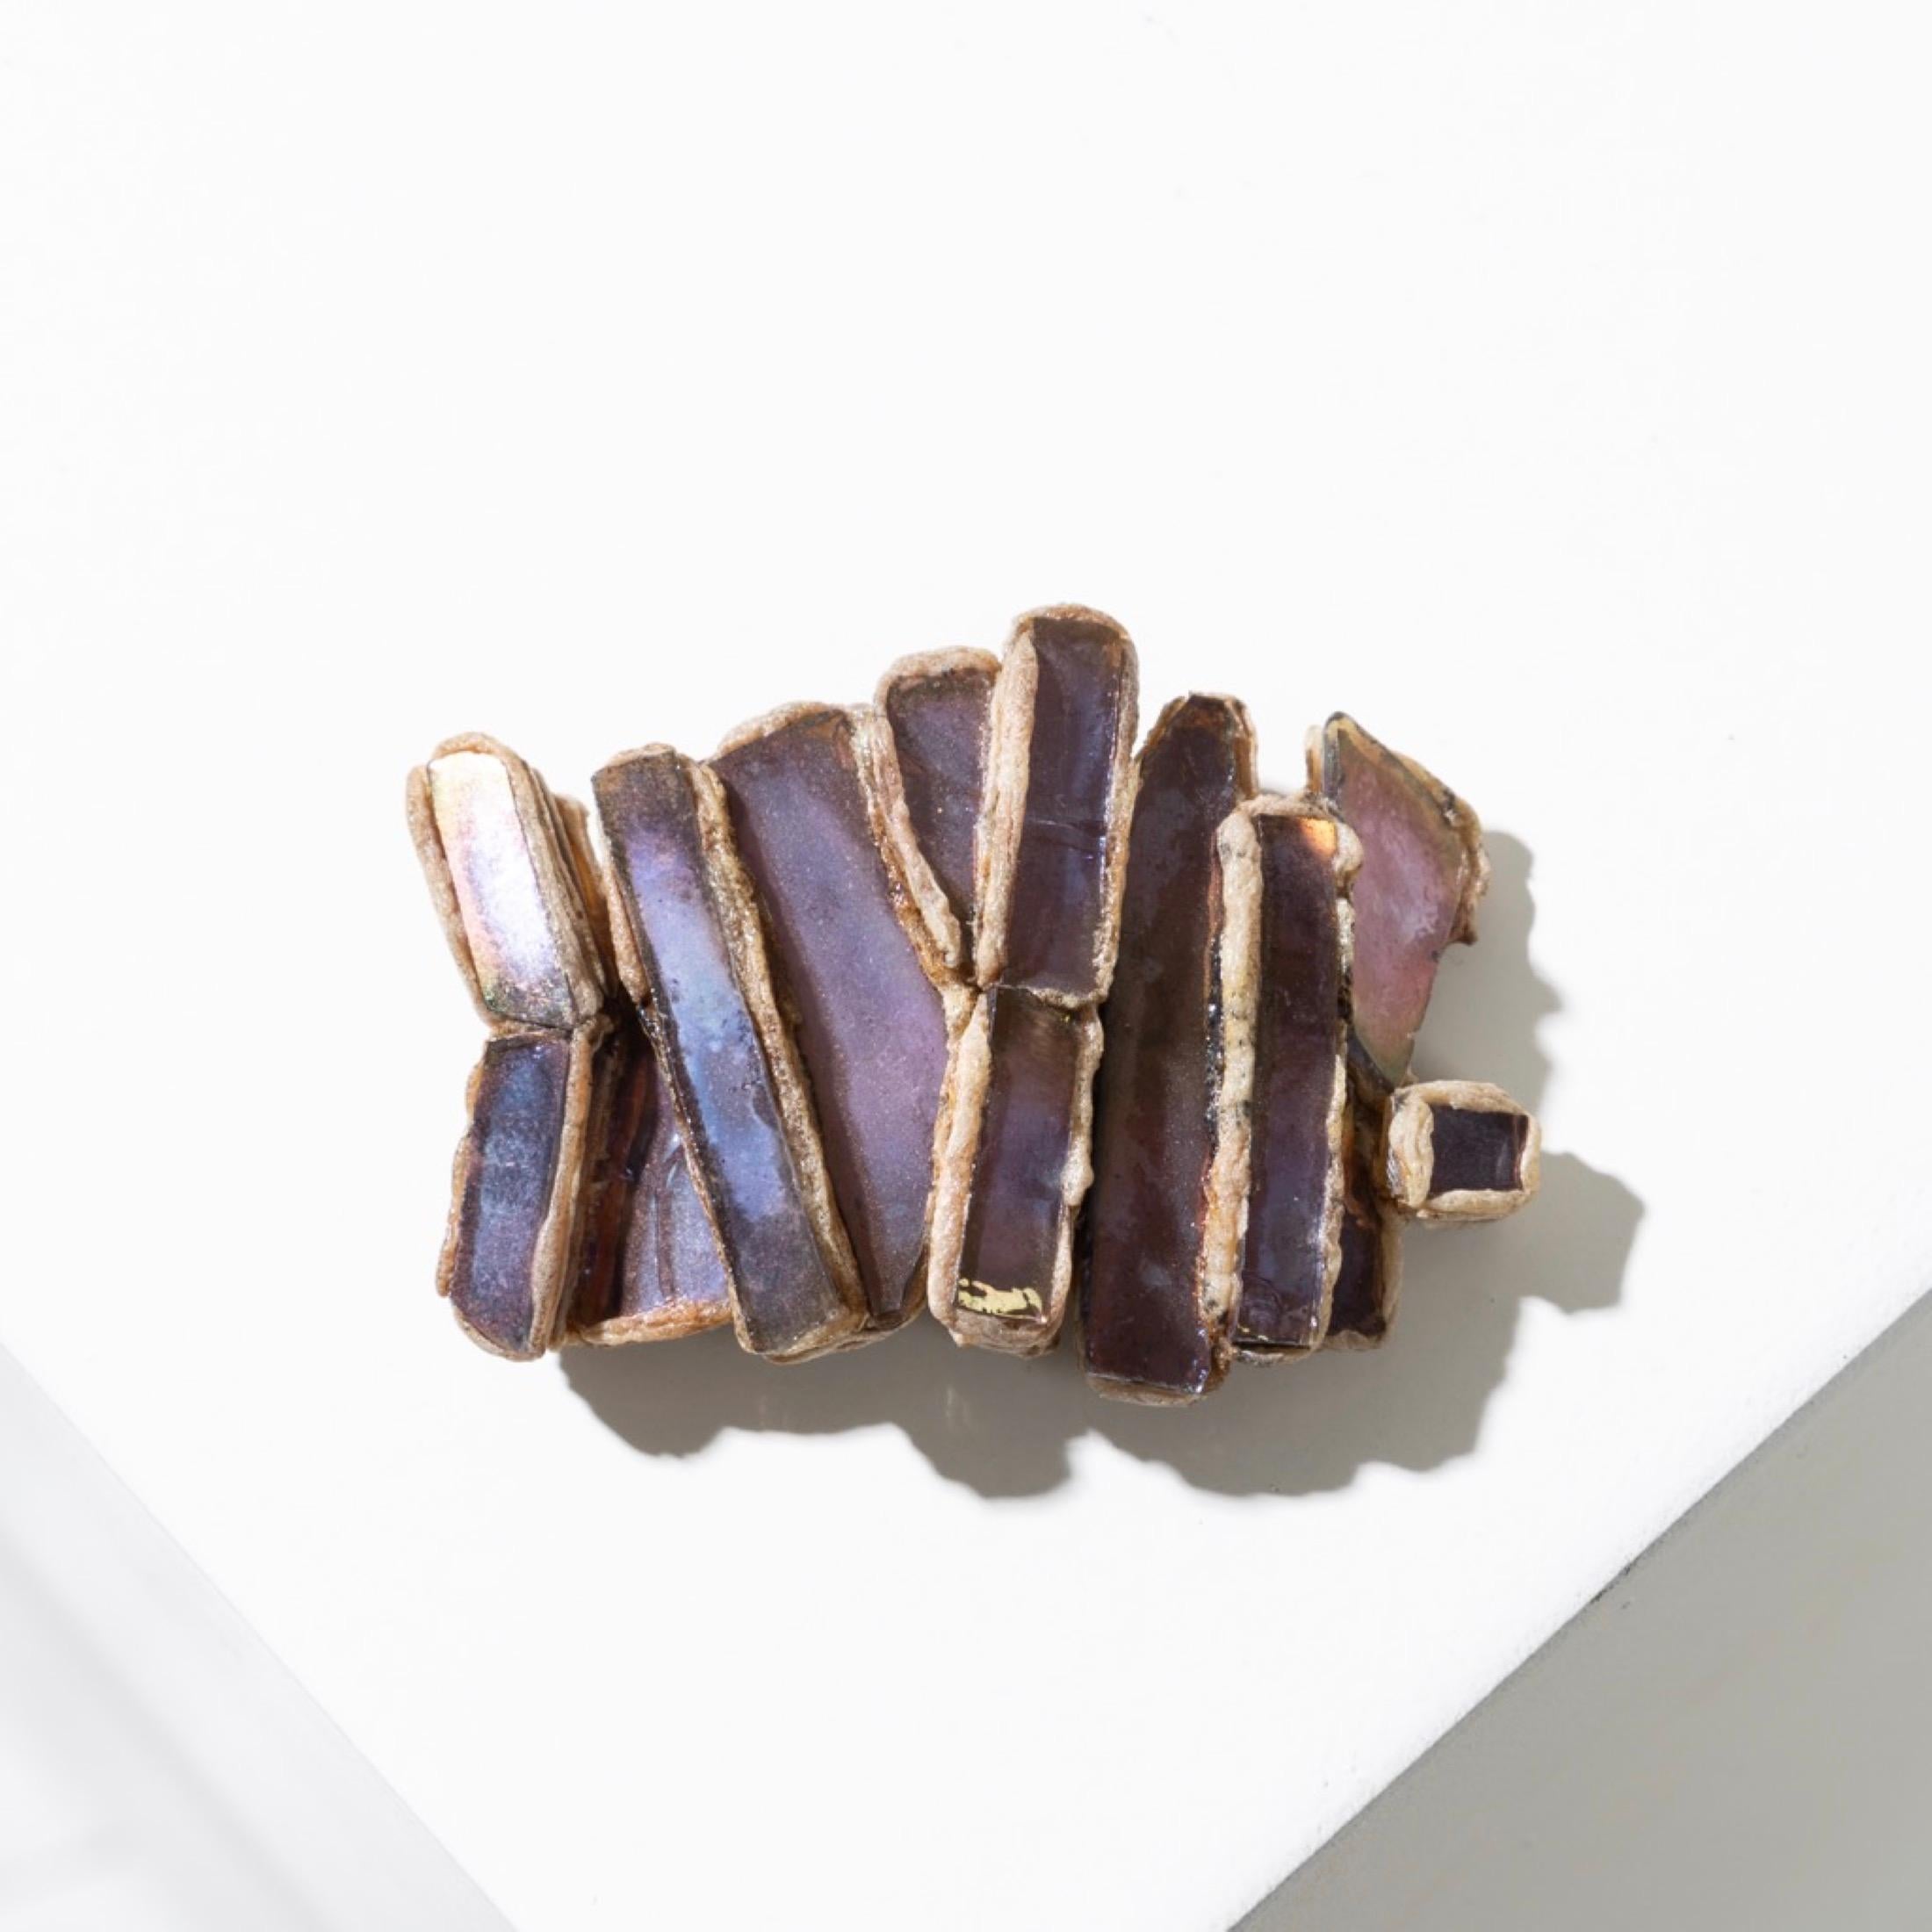 This brooch by Line Vautrin is distinguished by its elegance and refinement, thanks to the inlay of rectangular purple mirrors arranged vertically. This arrangement creates a singular rectangular shape, with multiple reliefs. The texture of beige